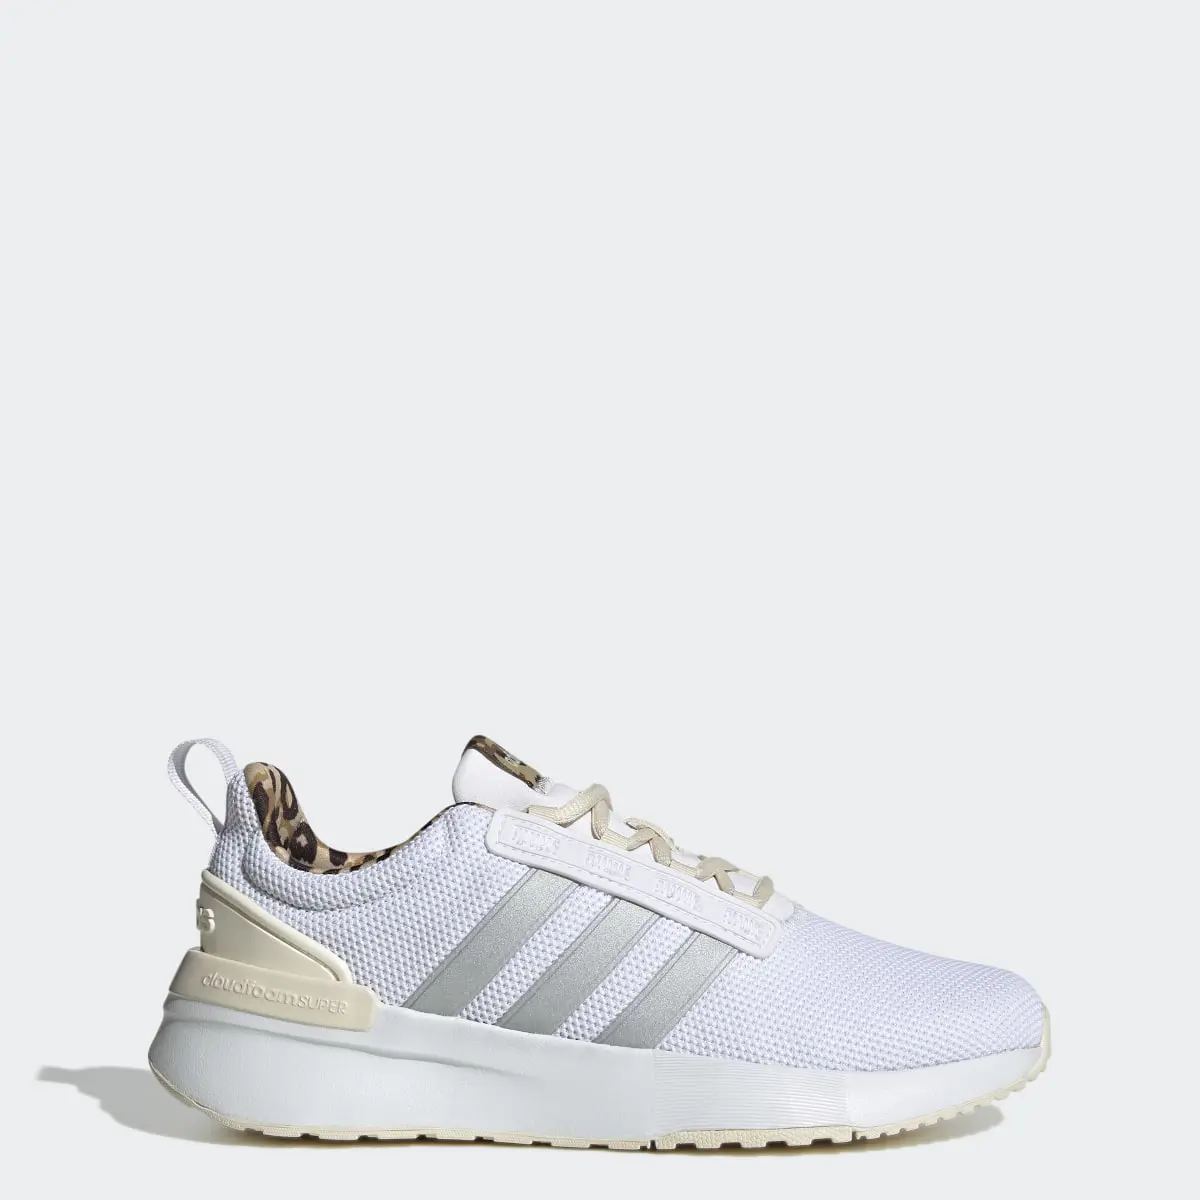 Adidas Racer TR21 Shoes. 1